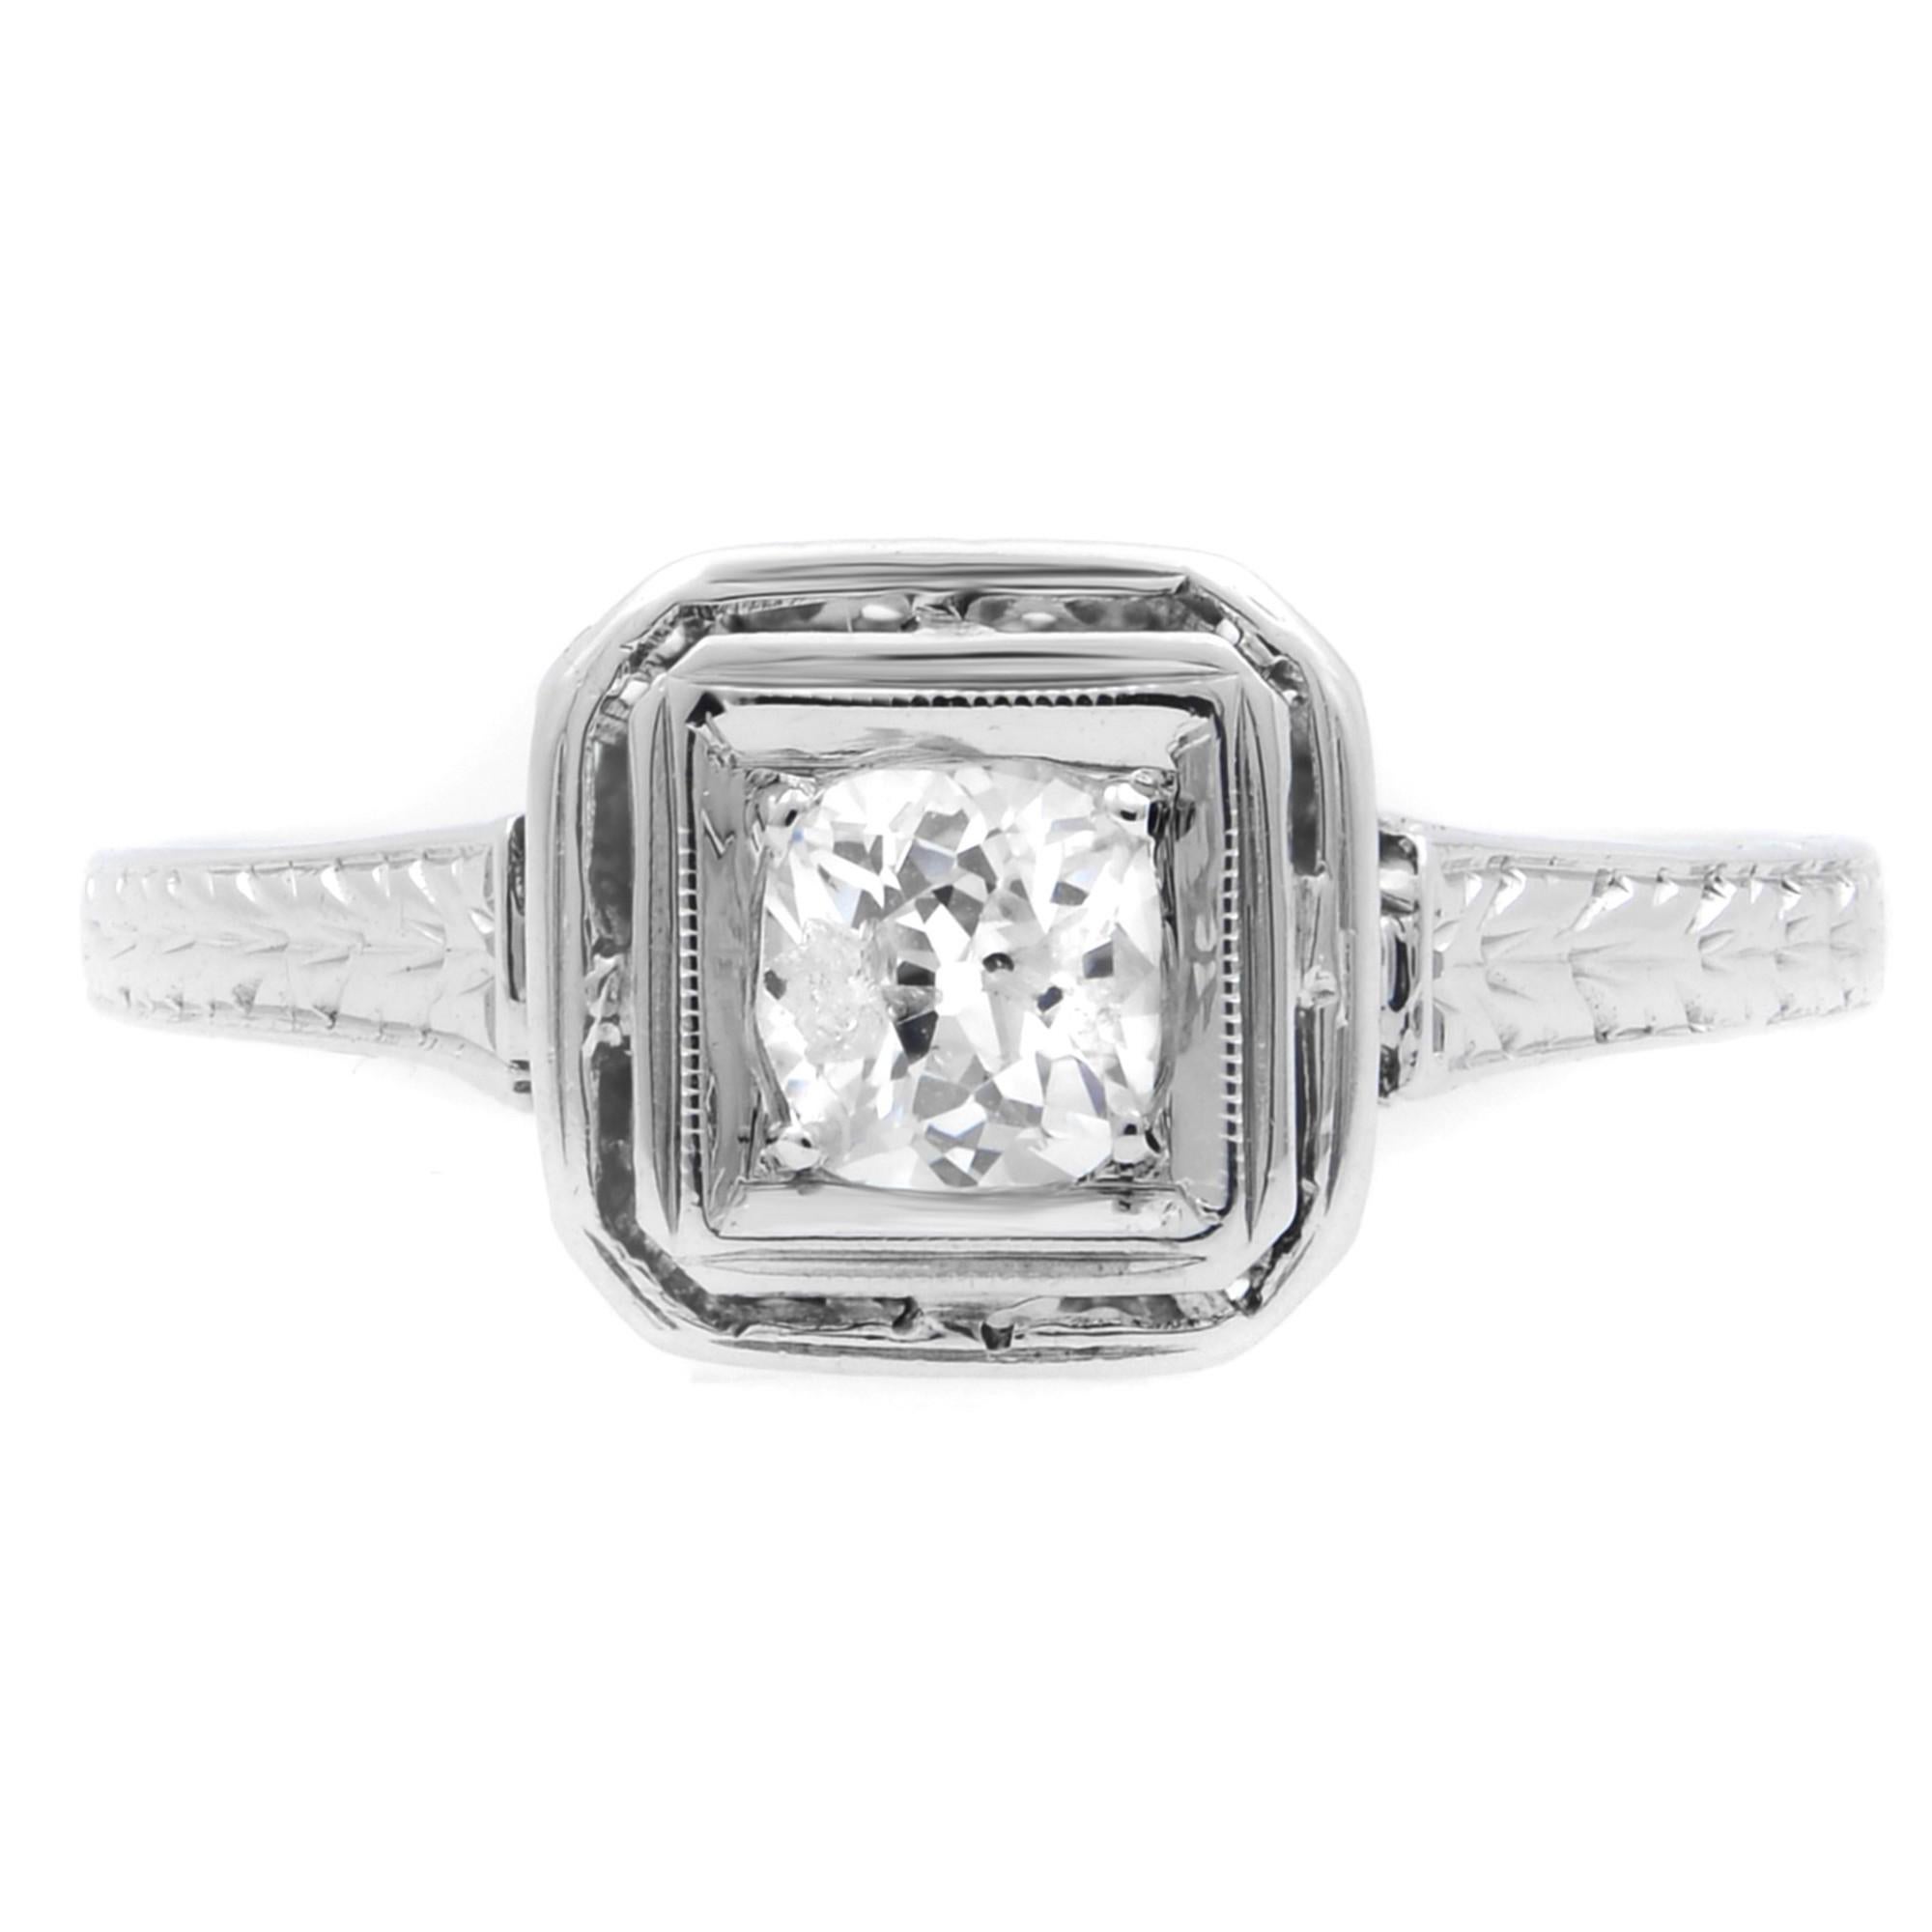 Simple yet alluring, this antique diamond engagement ring is crafted in platinum. It features a prong set round cut diamond weighing 0.50 carat with an engraved shank. Diamond quality: color G-H and clarity SI2. Ring size: 6. Total weight: 2.21